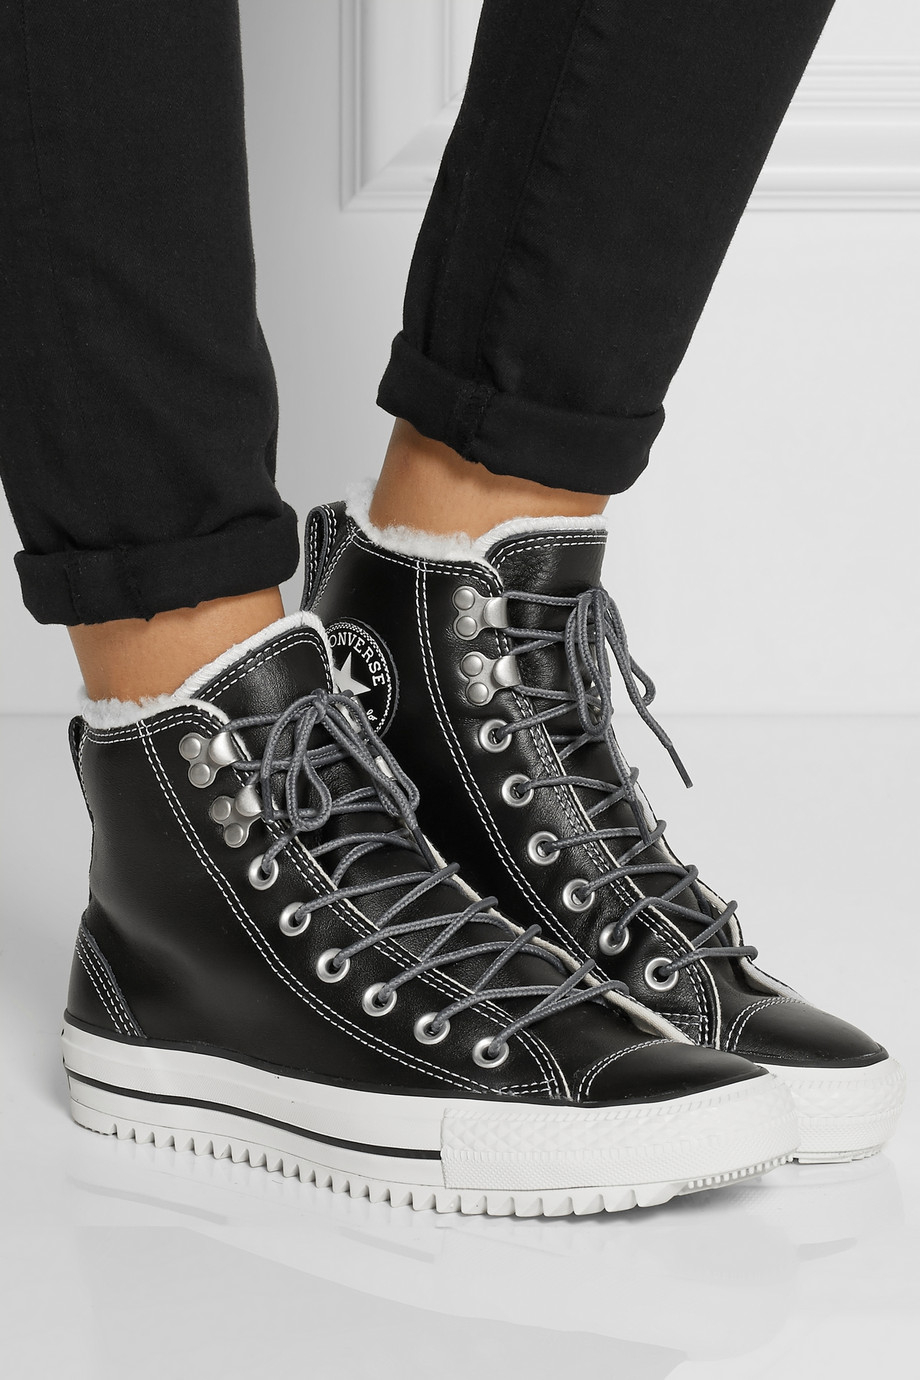 Lyst - Converse Chuck Taylor All Star City Hiker Shearling-Lined ...